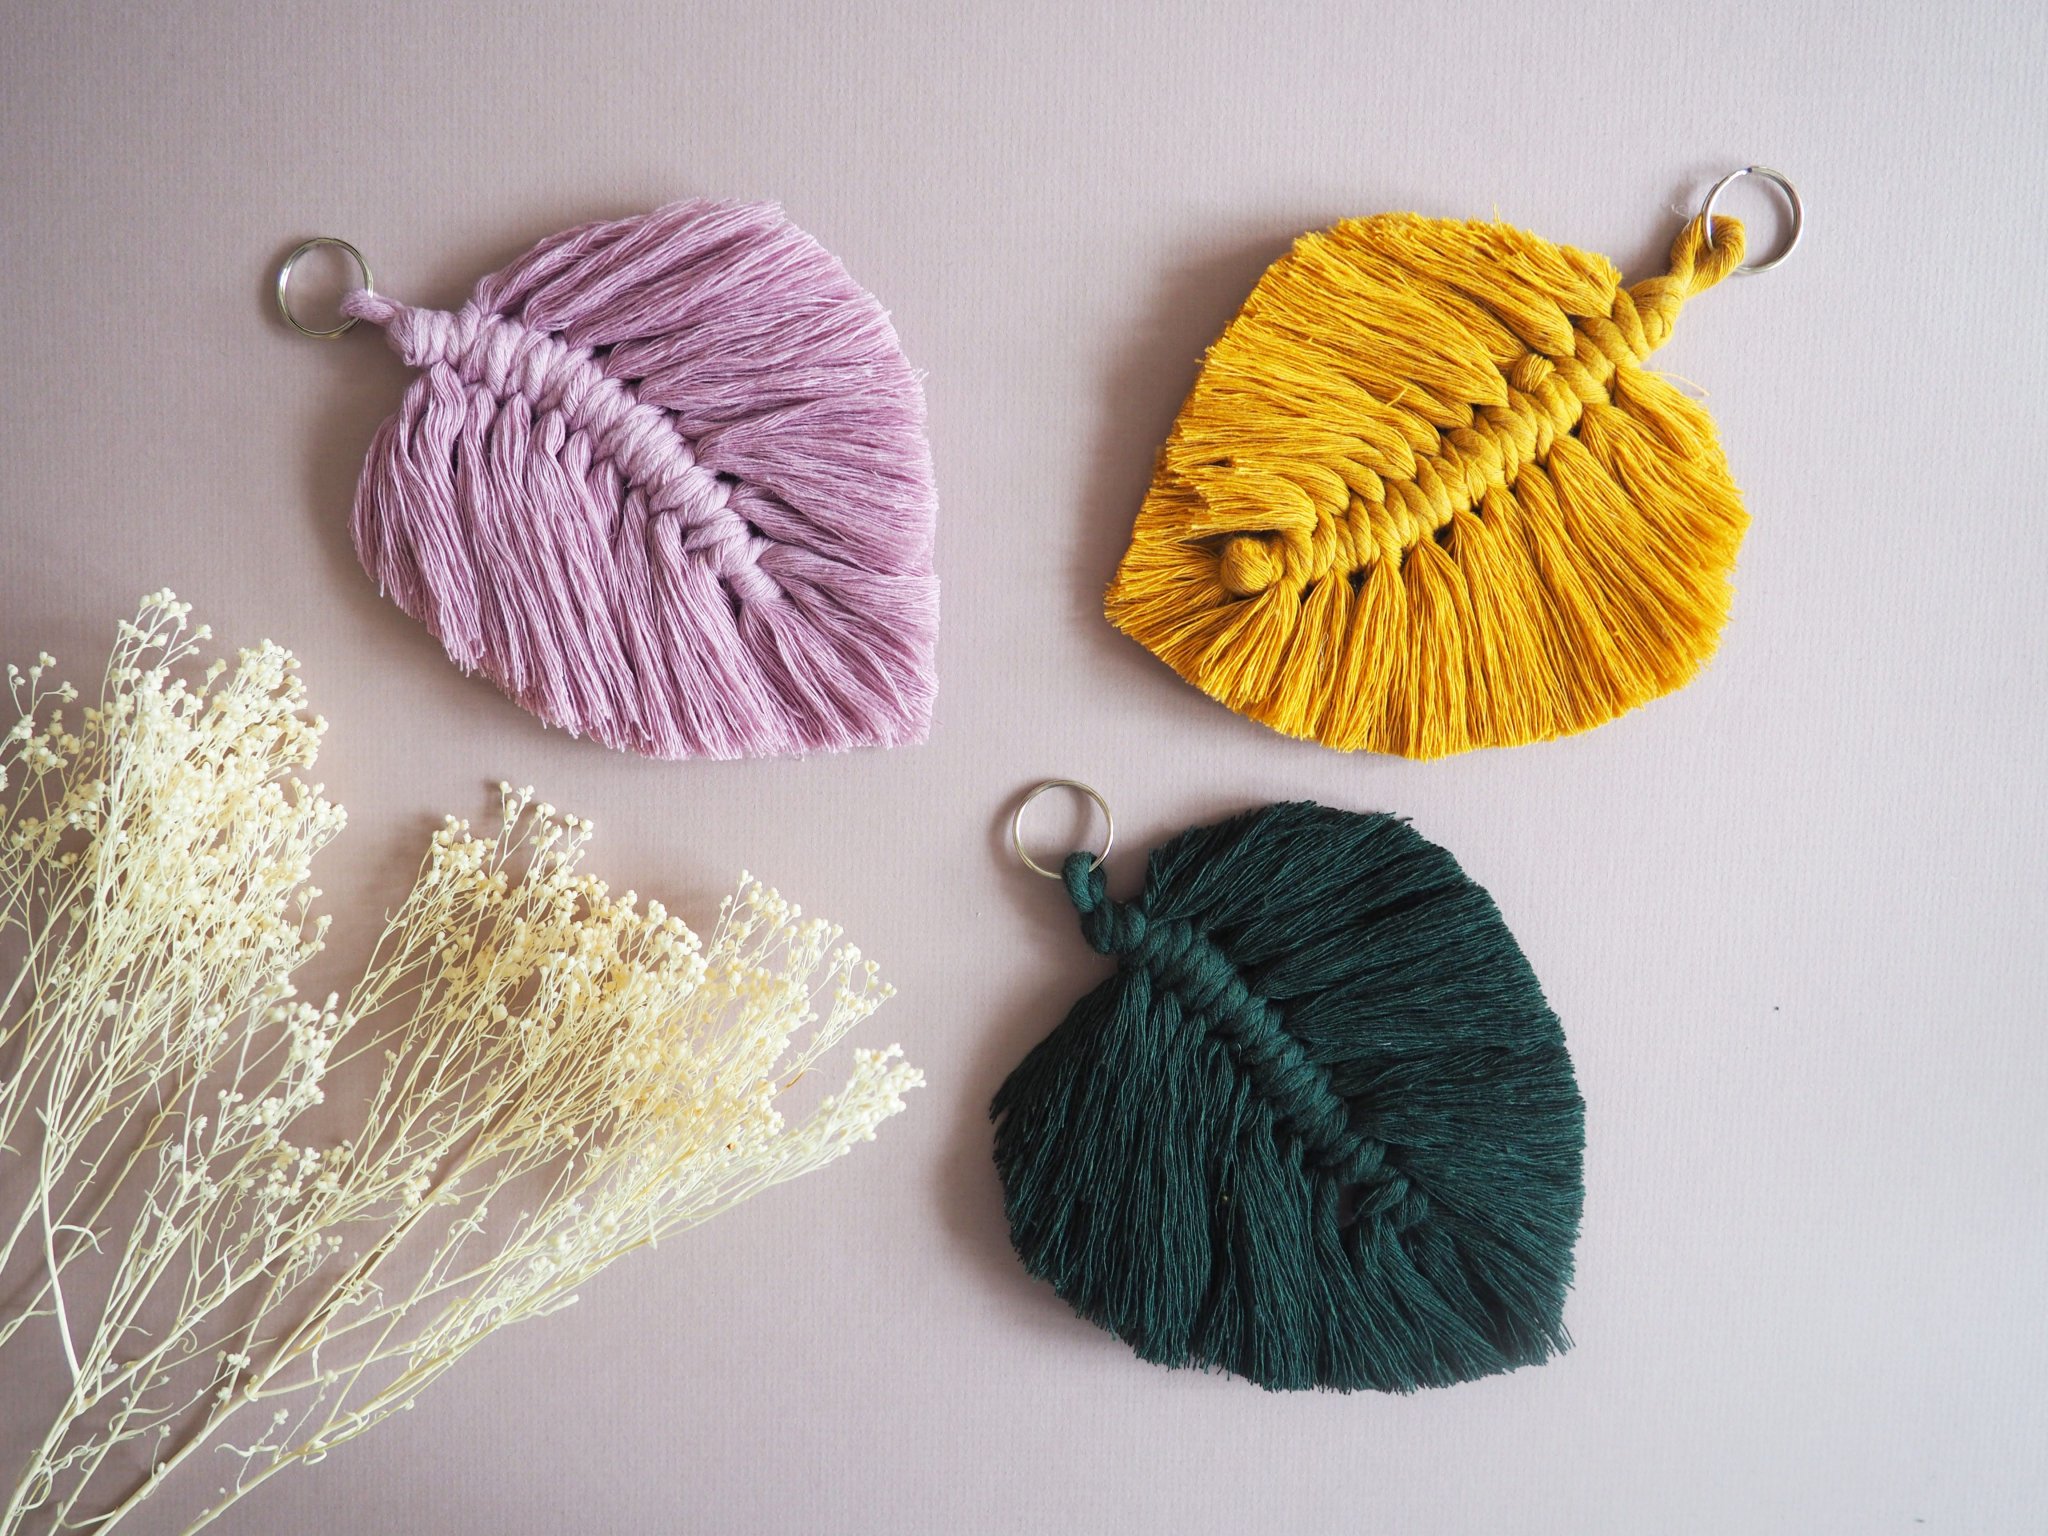 How to make a macrame feather keychain